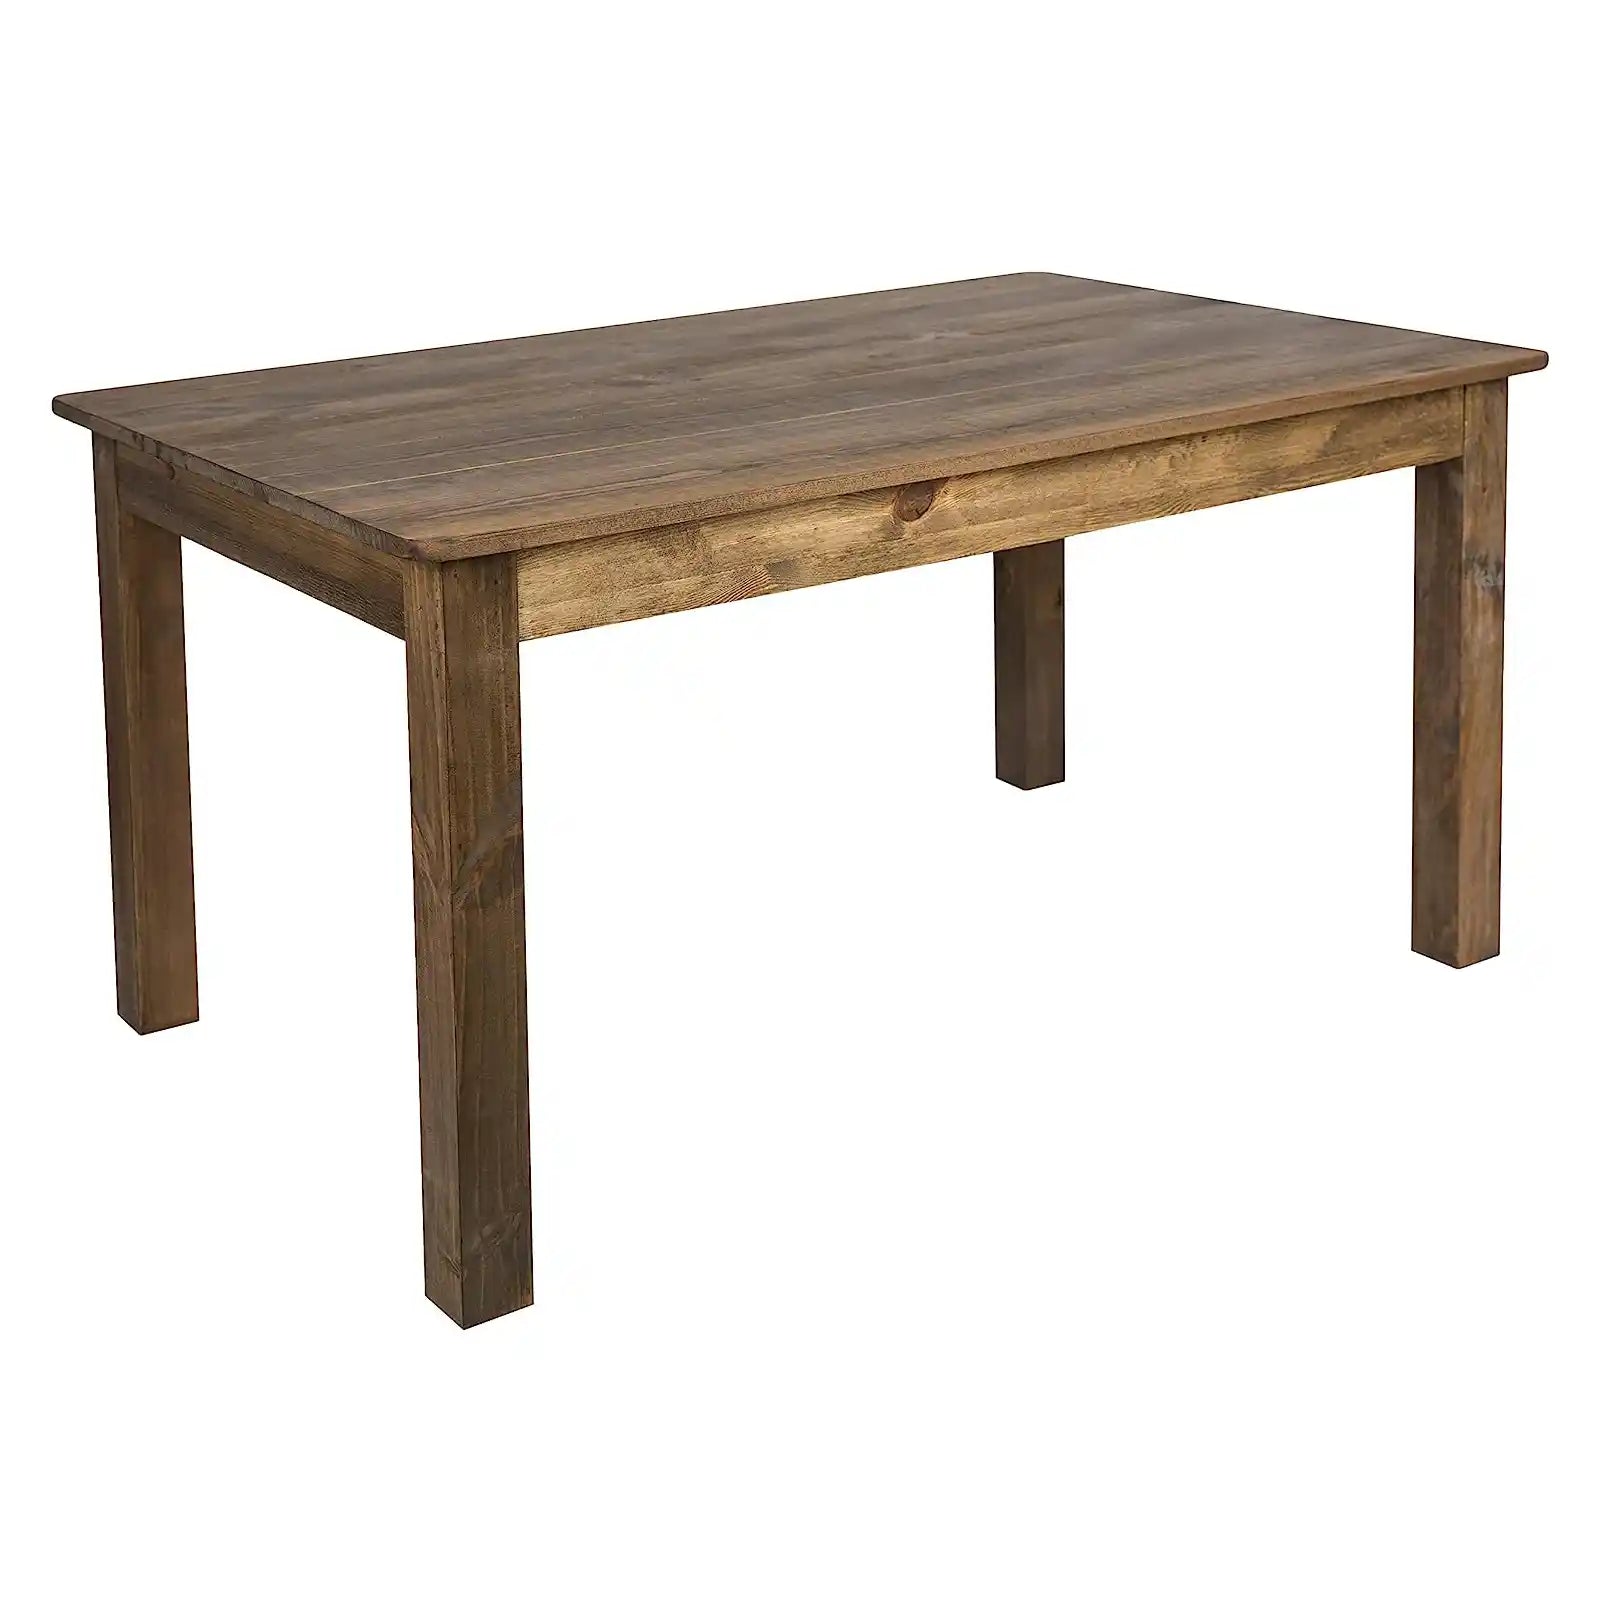 Rectangular Antique Rustic Solid Pine Wood Dining Table, Farmhouse Table